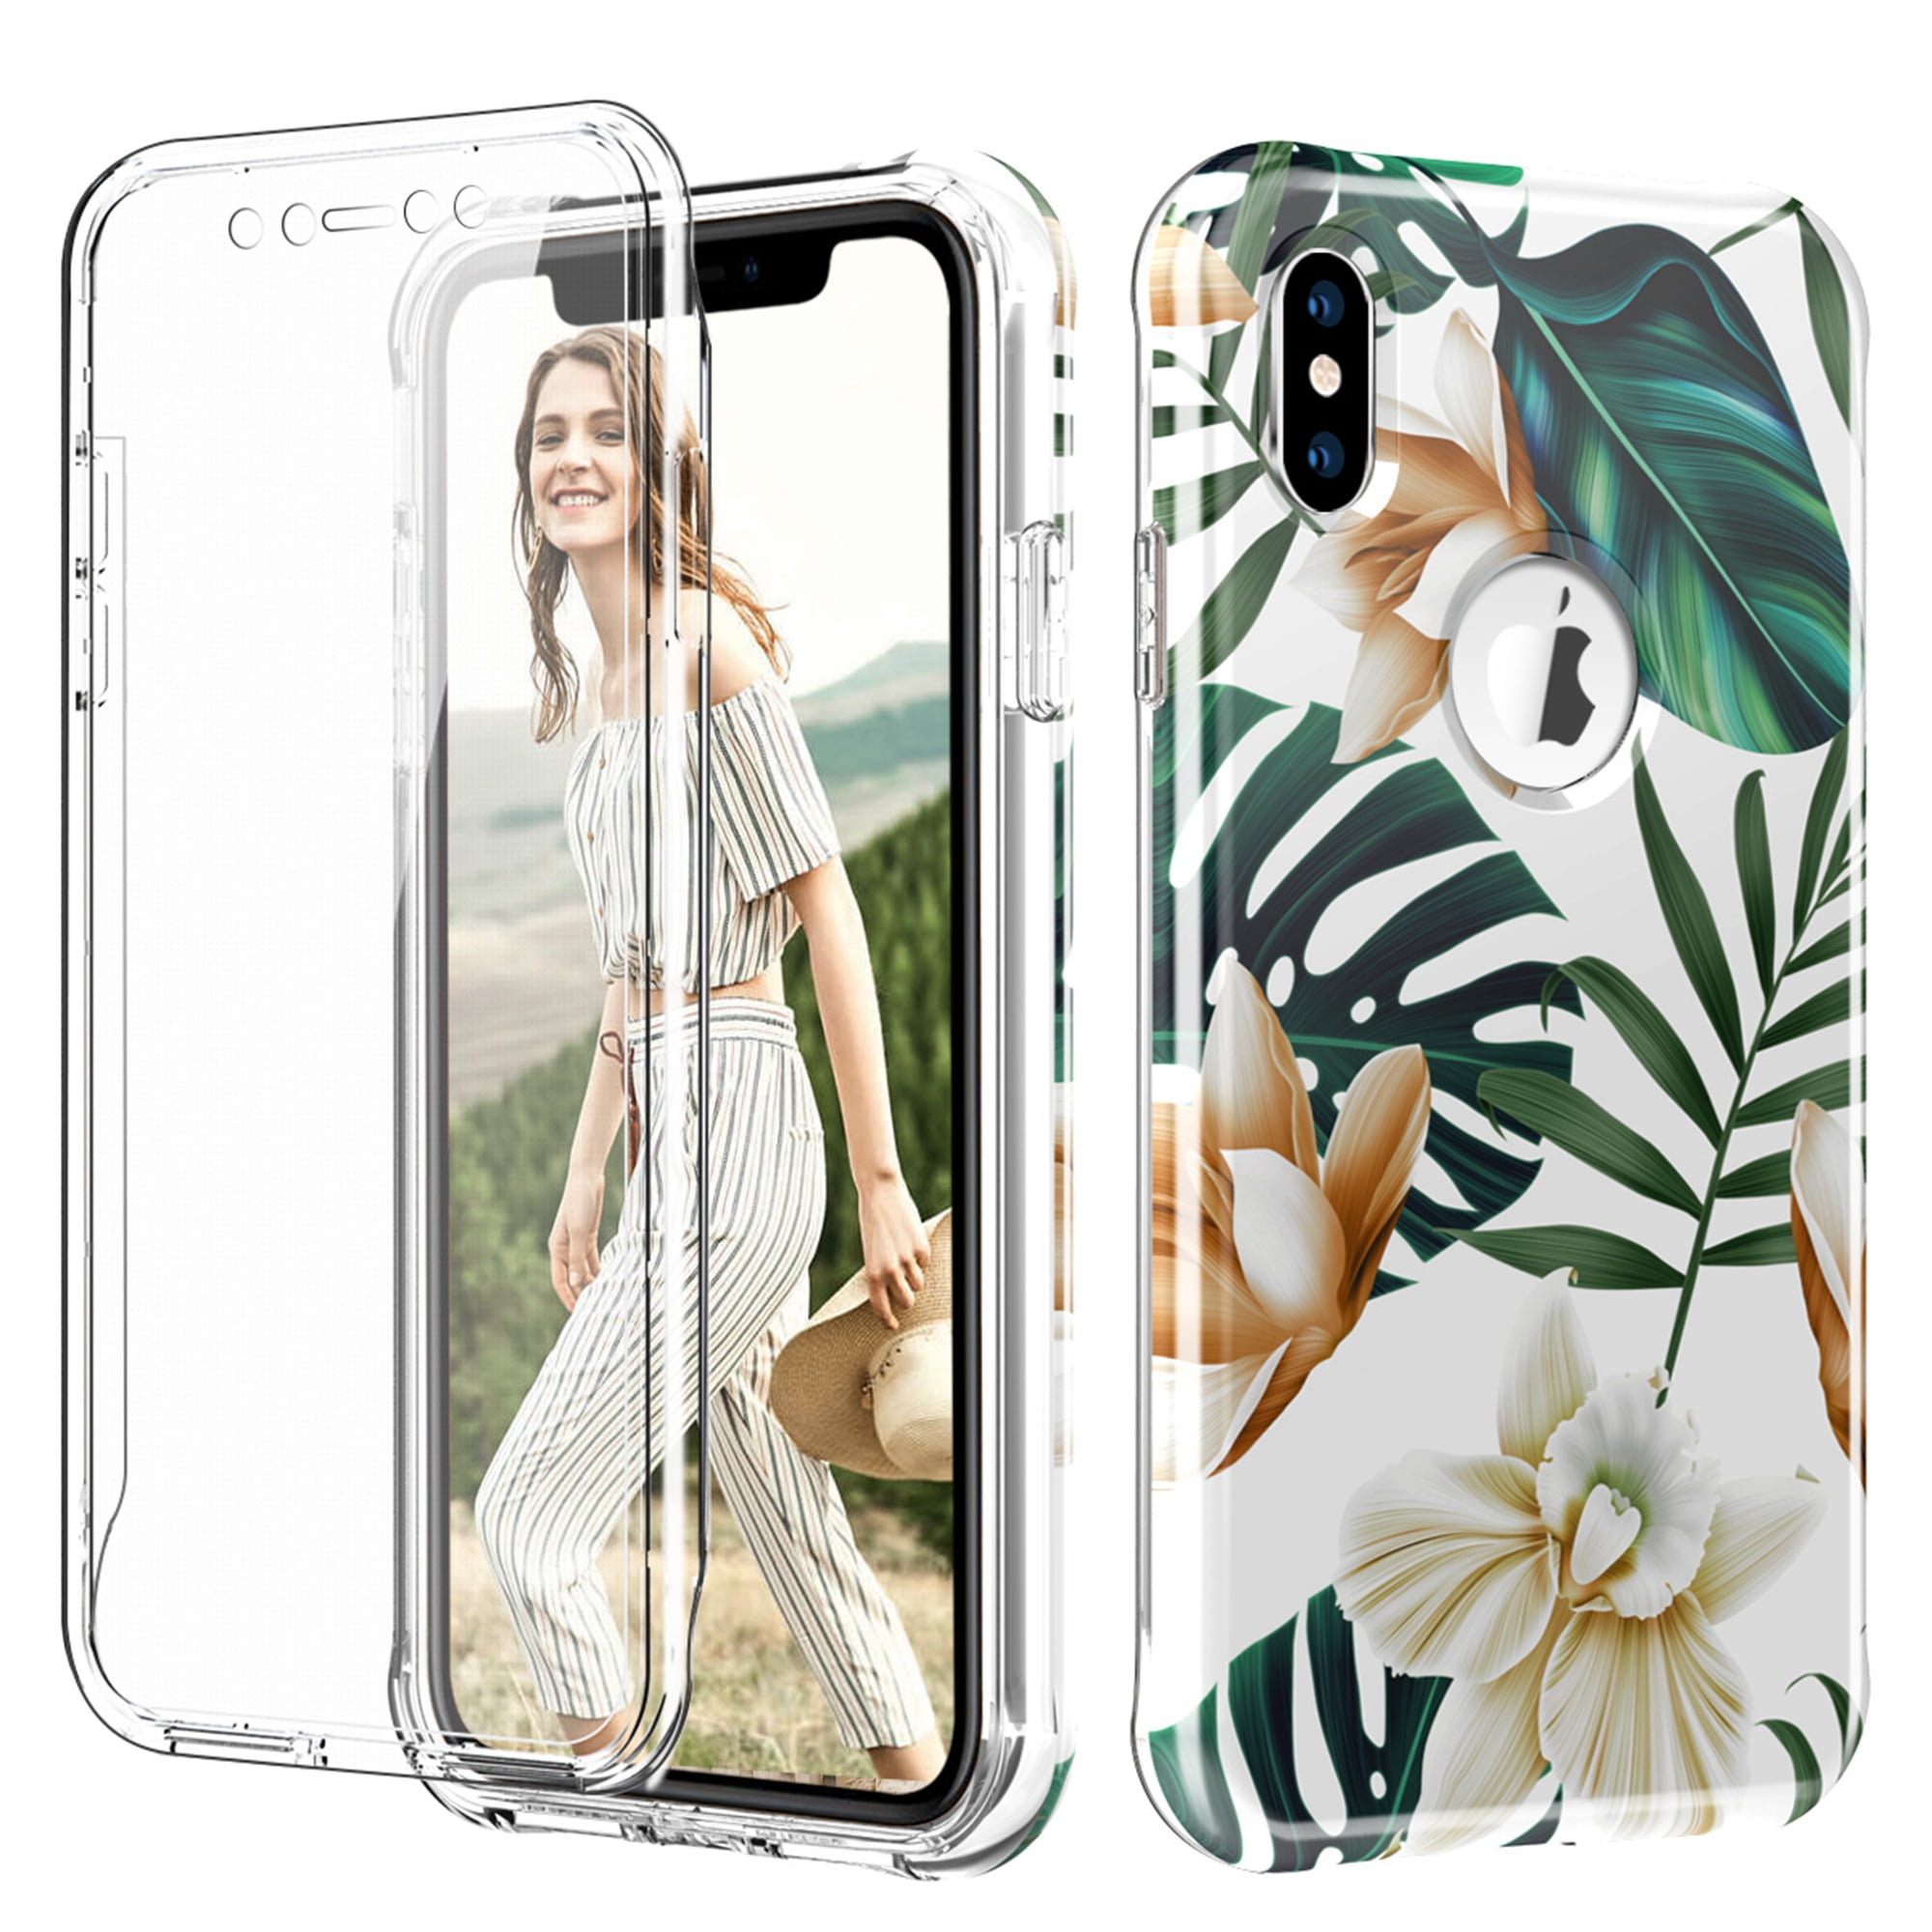 straf duizend wat betreft iPhone XS Max Case, Dteck Full body Protection Shockproof Hybrid Hard  PC+Soft TPU Dual Layer Protective Case Built-in Screen Cover For Apple  iPhone XS Max 6.5 inch, White Flower - Walmart.com